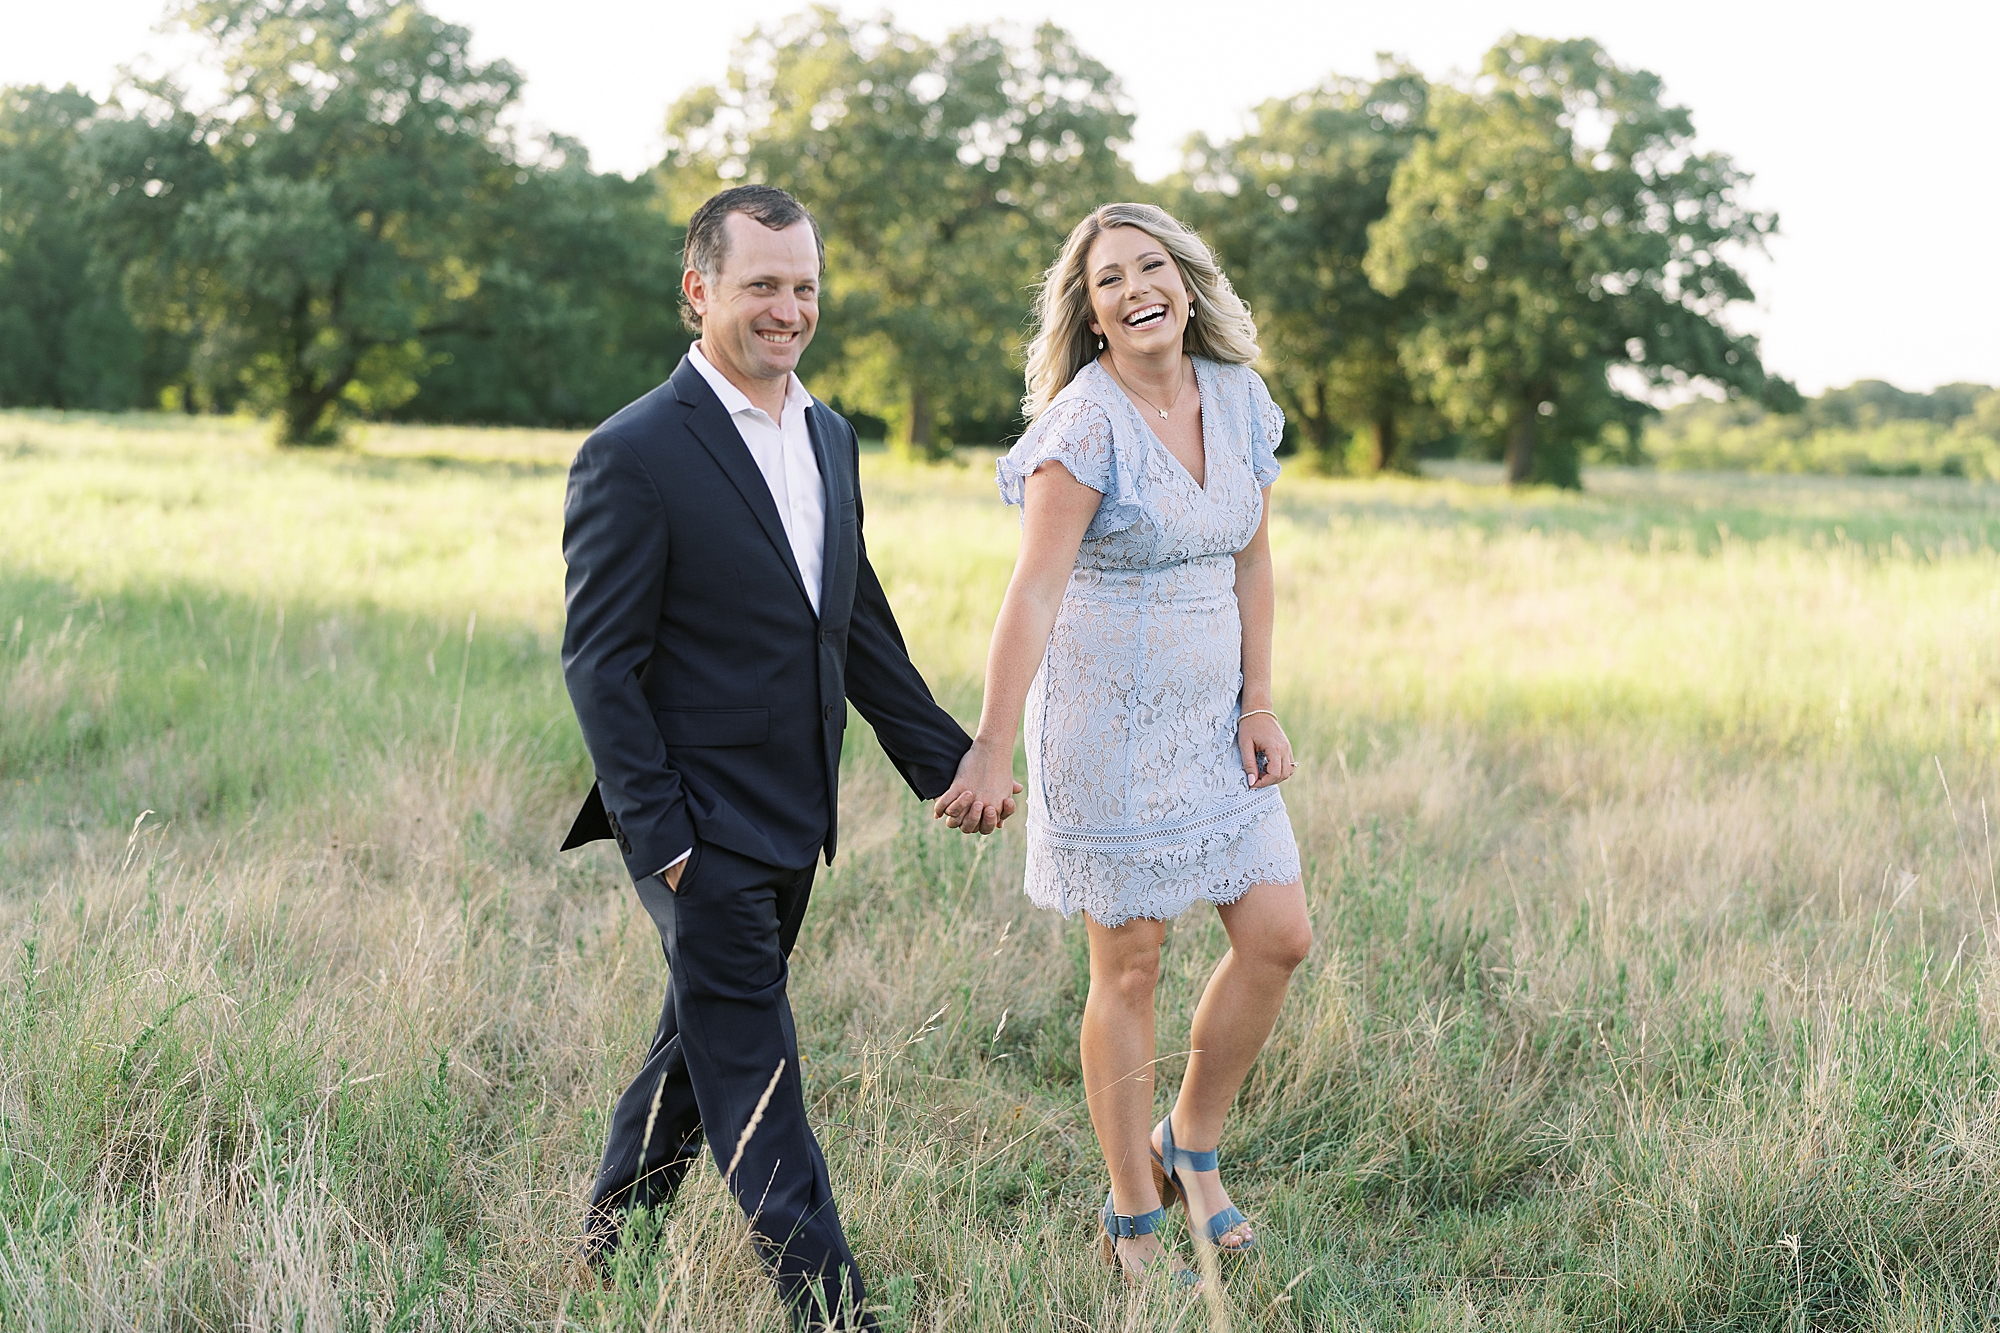 YES you should invite all your animals to your engagement session! Set on the couples' property, this Texas Hill Country engagement session is the perfect mix of goregeous and classic, with sentimental and fun! AND features their cows, horses, and two pups! Click through to read their adorable story and see some perfect outfit inspiration! #engagementsession #texashillcountry #farmengagementpictures